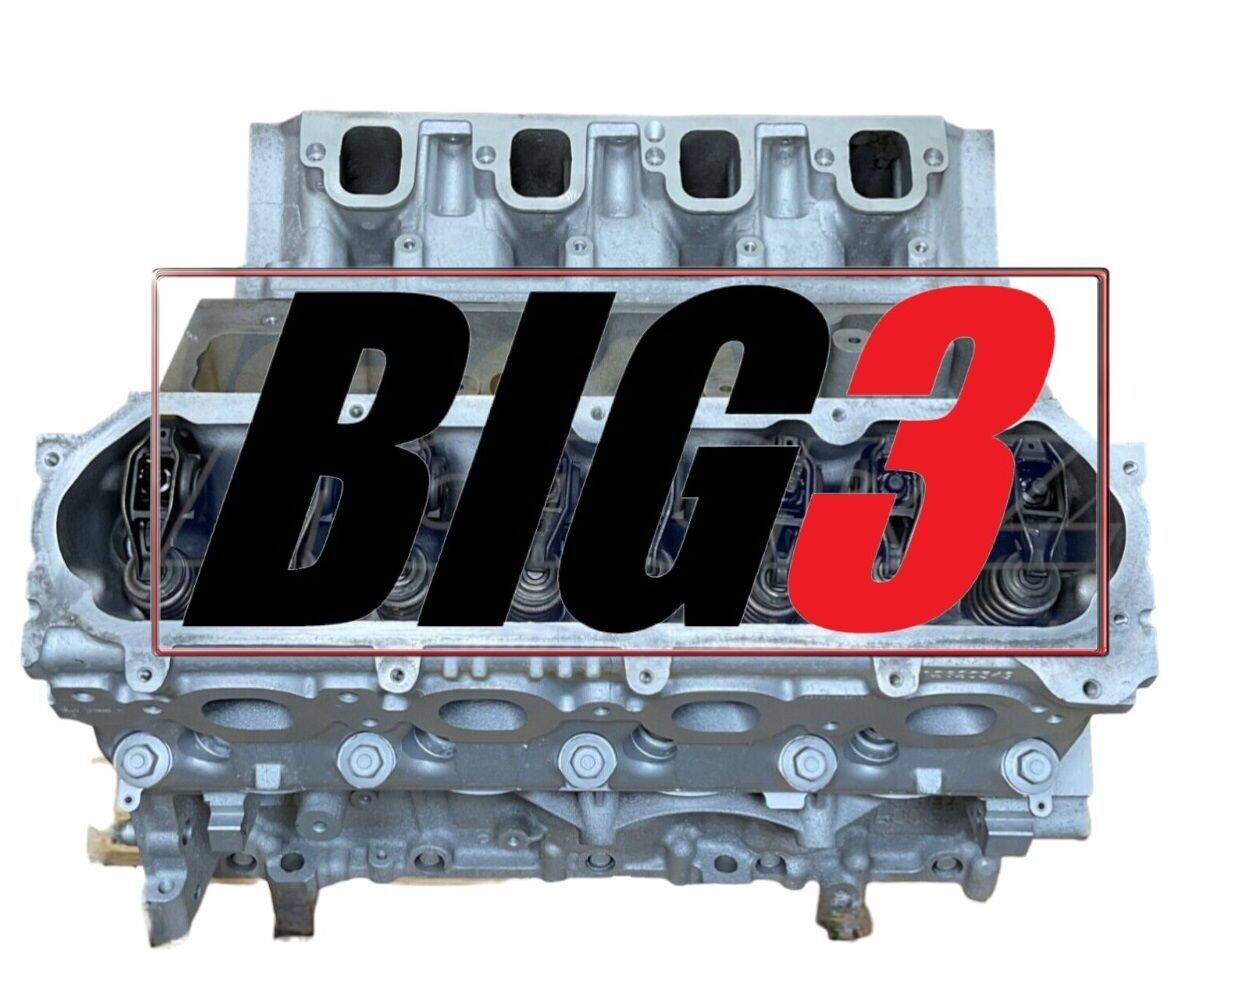 L84 GEN V ECOTEC3 5.3 ENGINE LONG BLOCK ASSEMBLY
2018 AND UP GM CHEVROLET 4 YEAR WARRANTY